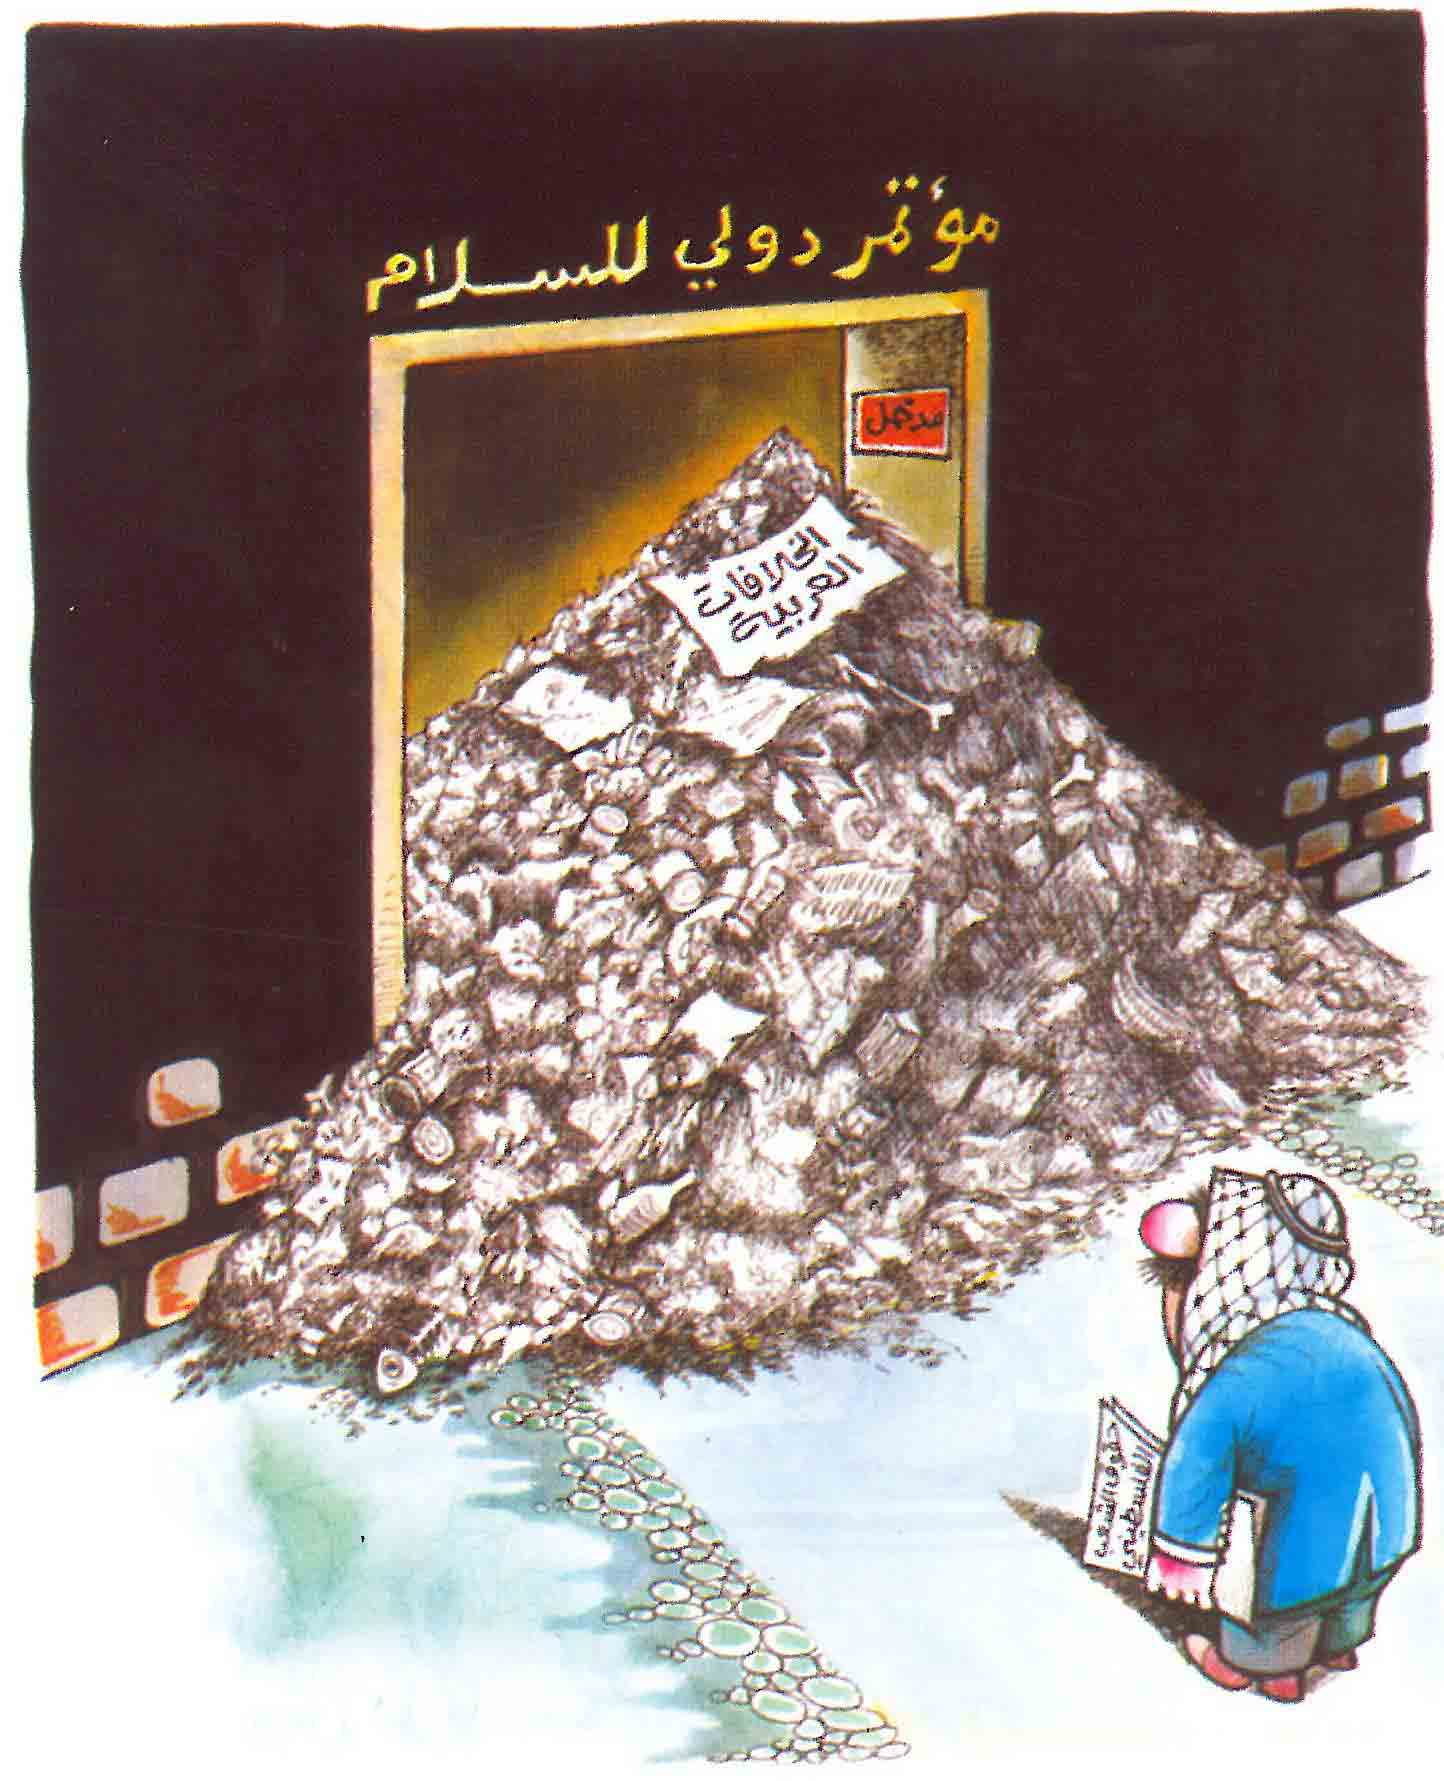 caricature_in_the_arab_countries3.jpg